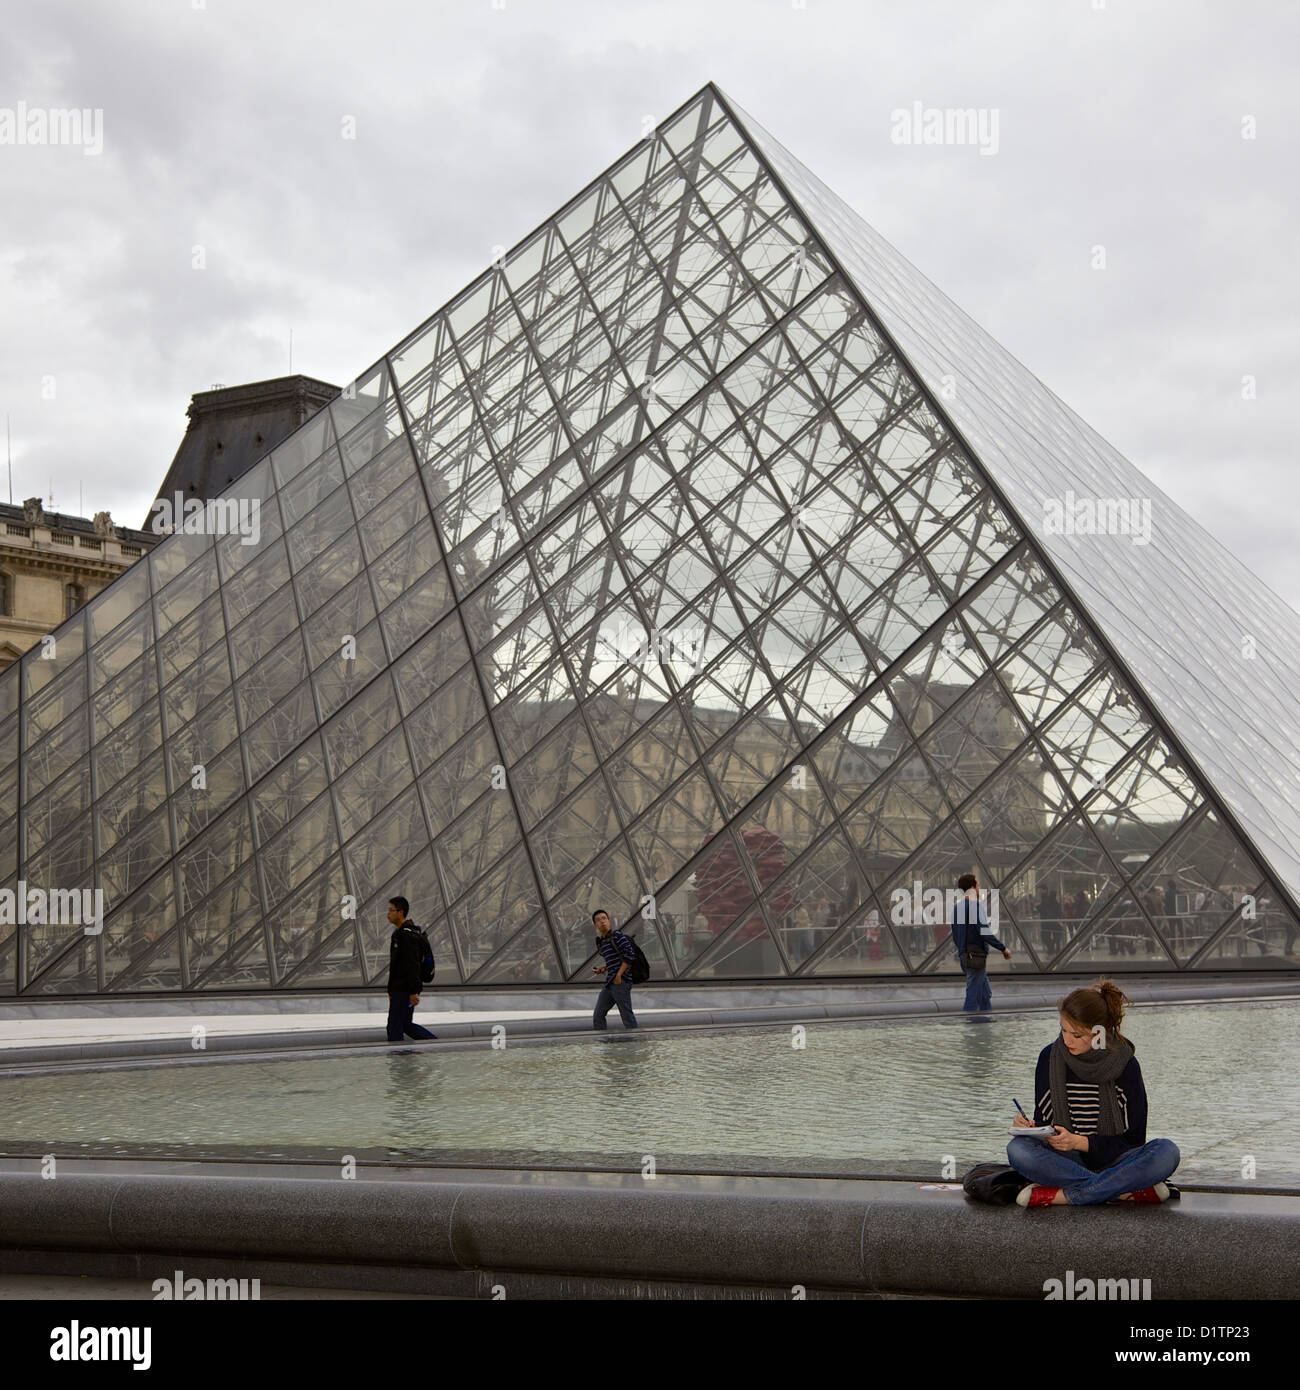 A young woman sits cross legged and writes in a notepad in front of the Louvre glass pyramid Paris, Ile de la Cite, France Stock Photo